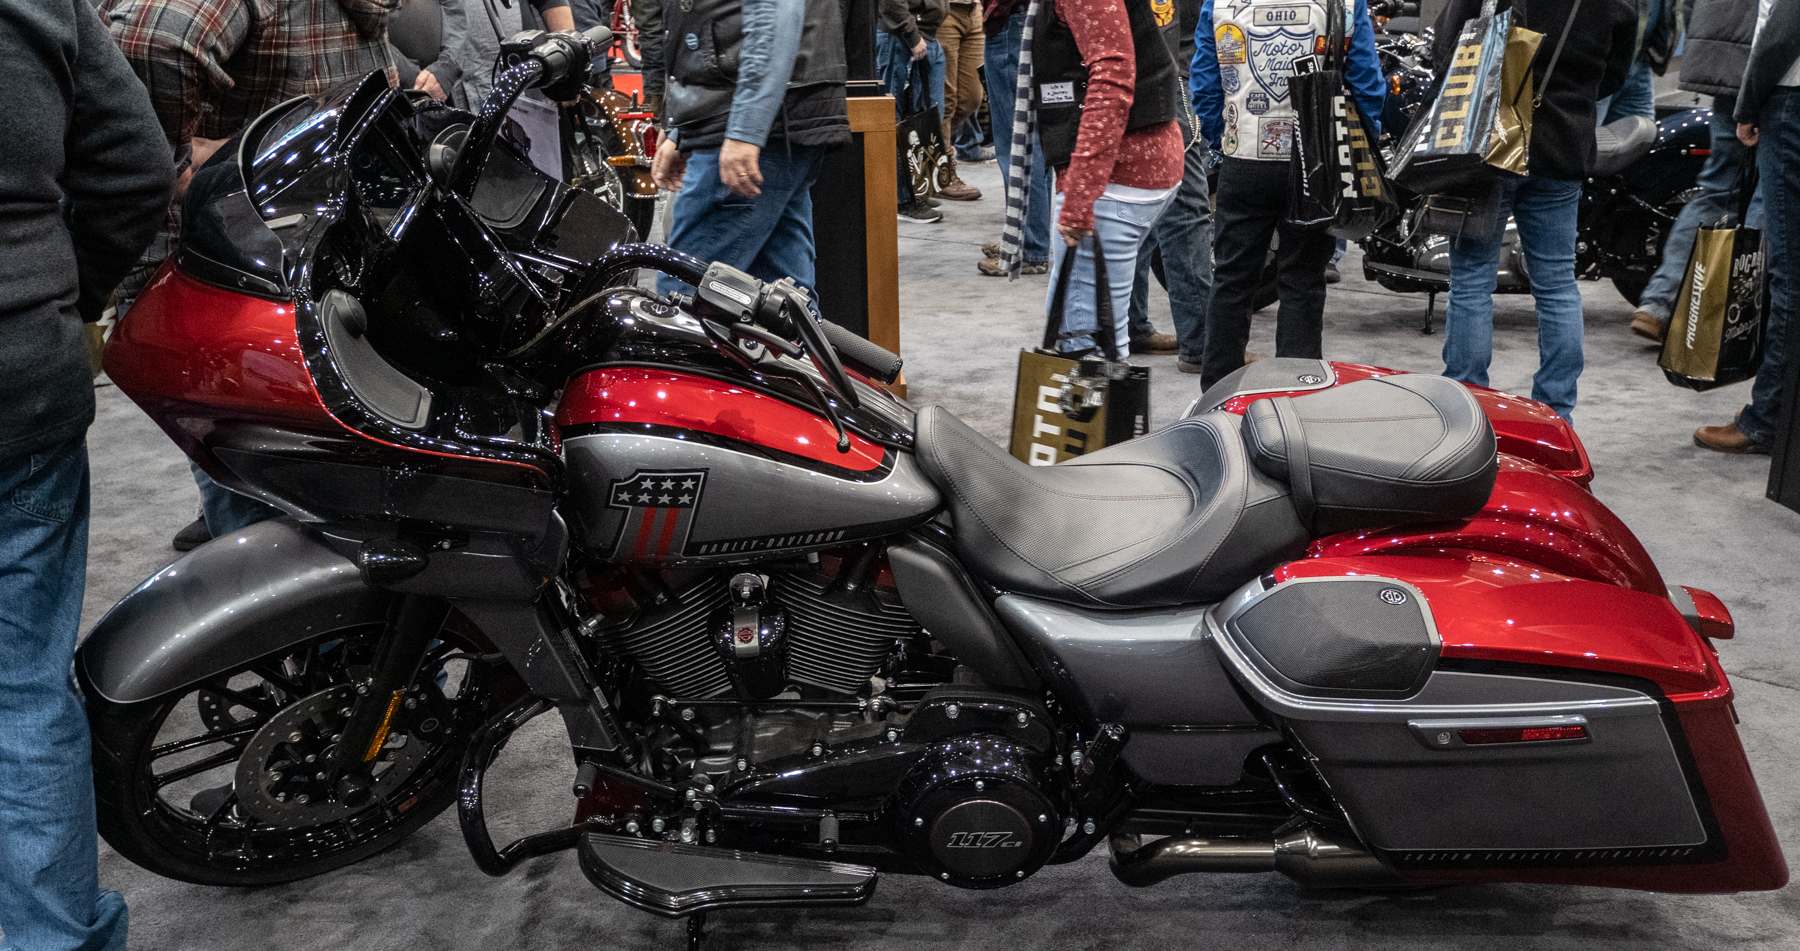 cleveland motorcycle show4 International Motorcycle Shows 2019 in Cleveland